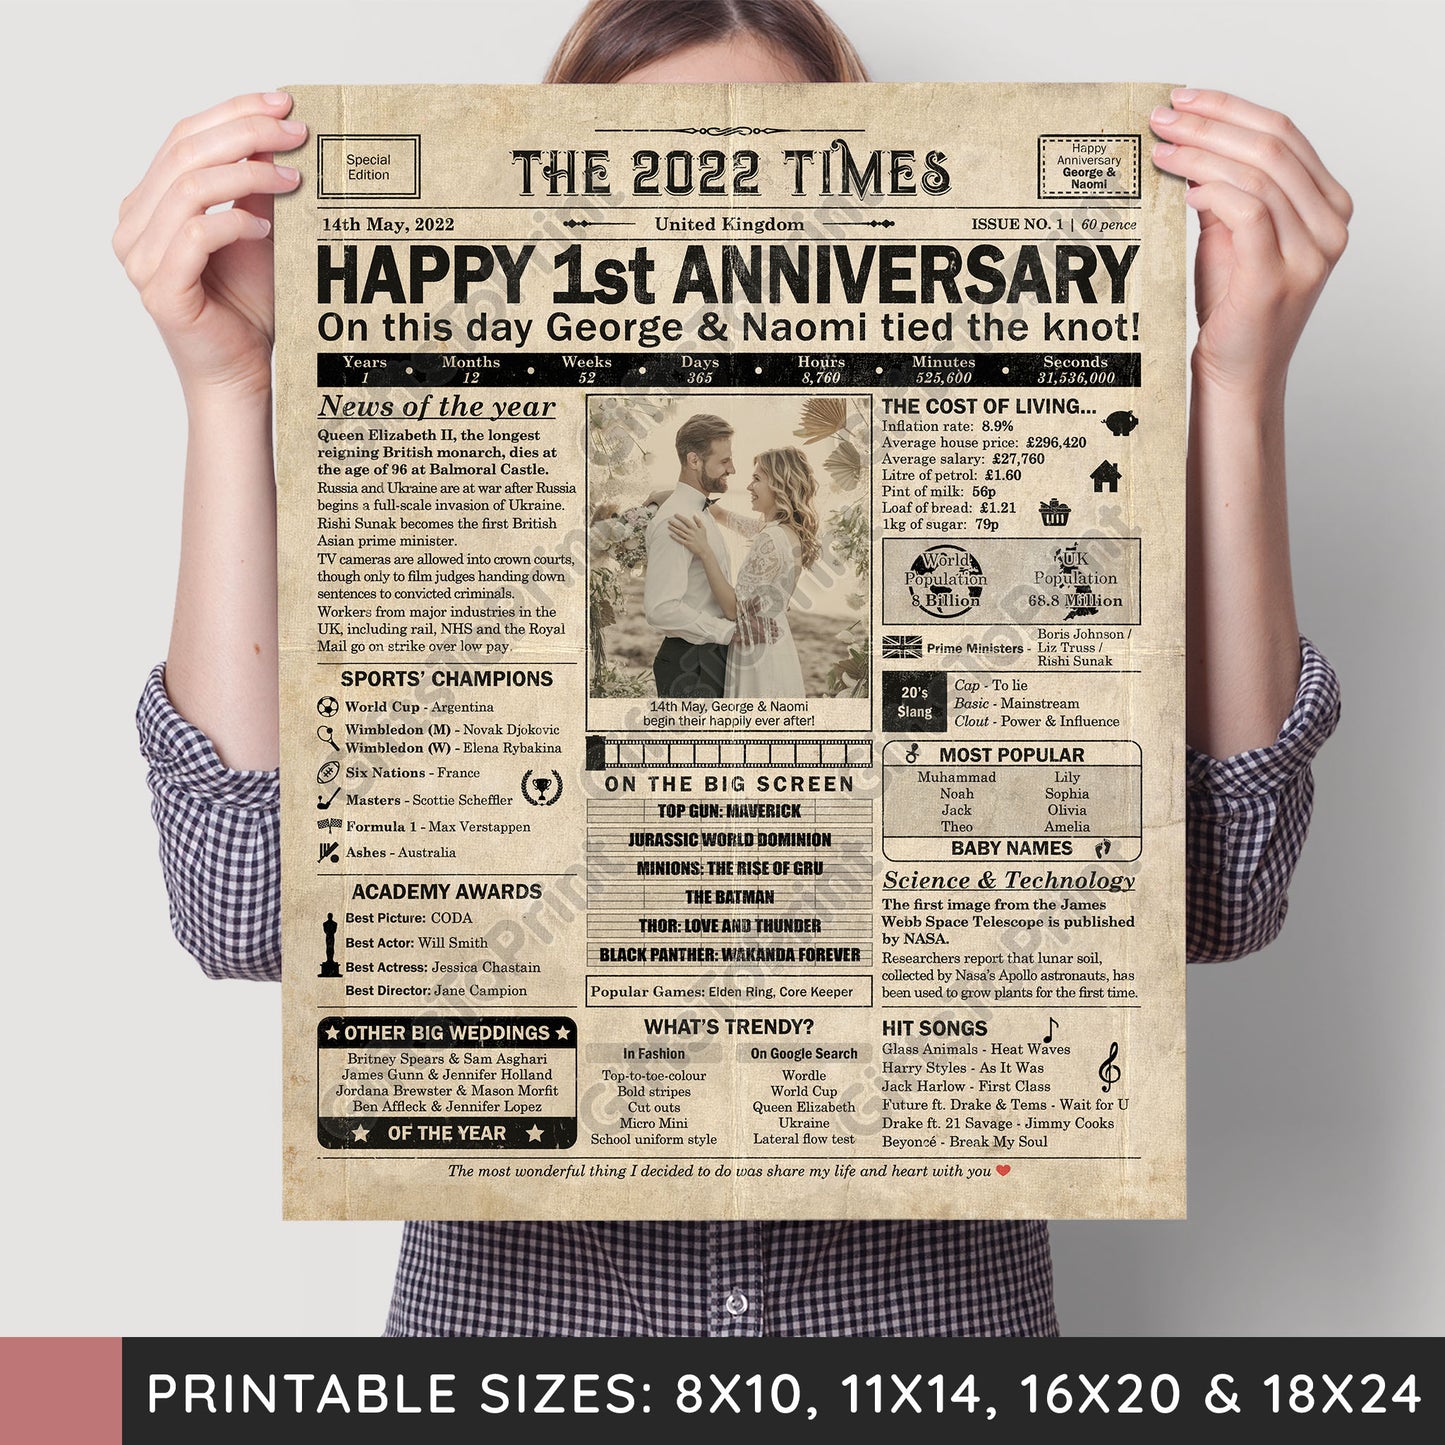 Personalised 1st Anniversary Gift: A Printable UK Newspaper Poster of 2022